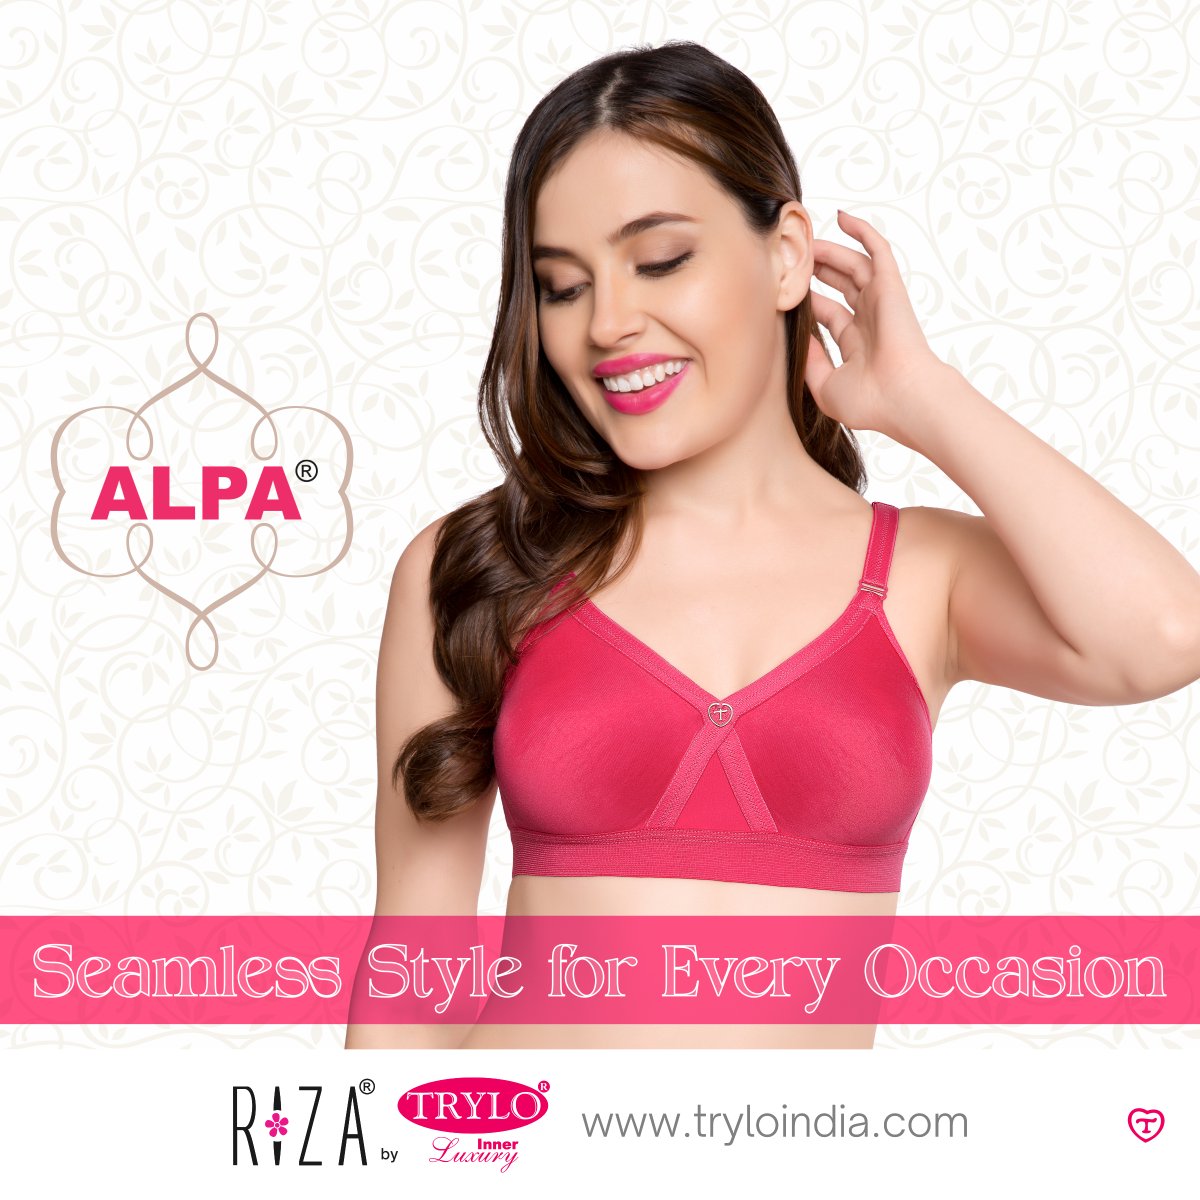 With Alpa, you can confidently flaunt your style in any outfit. The seamless design ensures a smooth appearance, making it the perfect choice for every occasion.

Product shown - Alpa

#TryloIndia #TryloIntimates #RizaIntimates #RizabyTrylo #SeamlessBra #AlpaBra